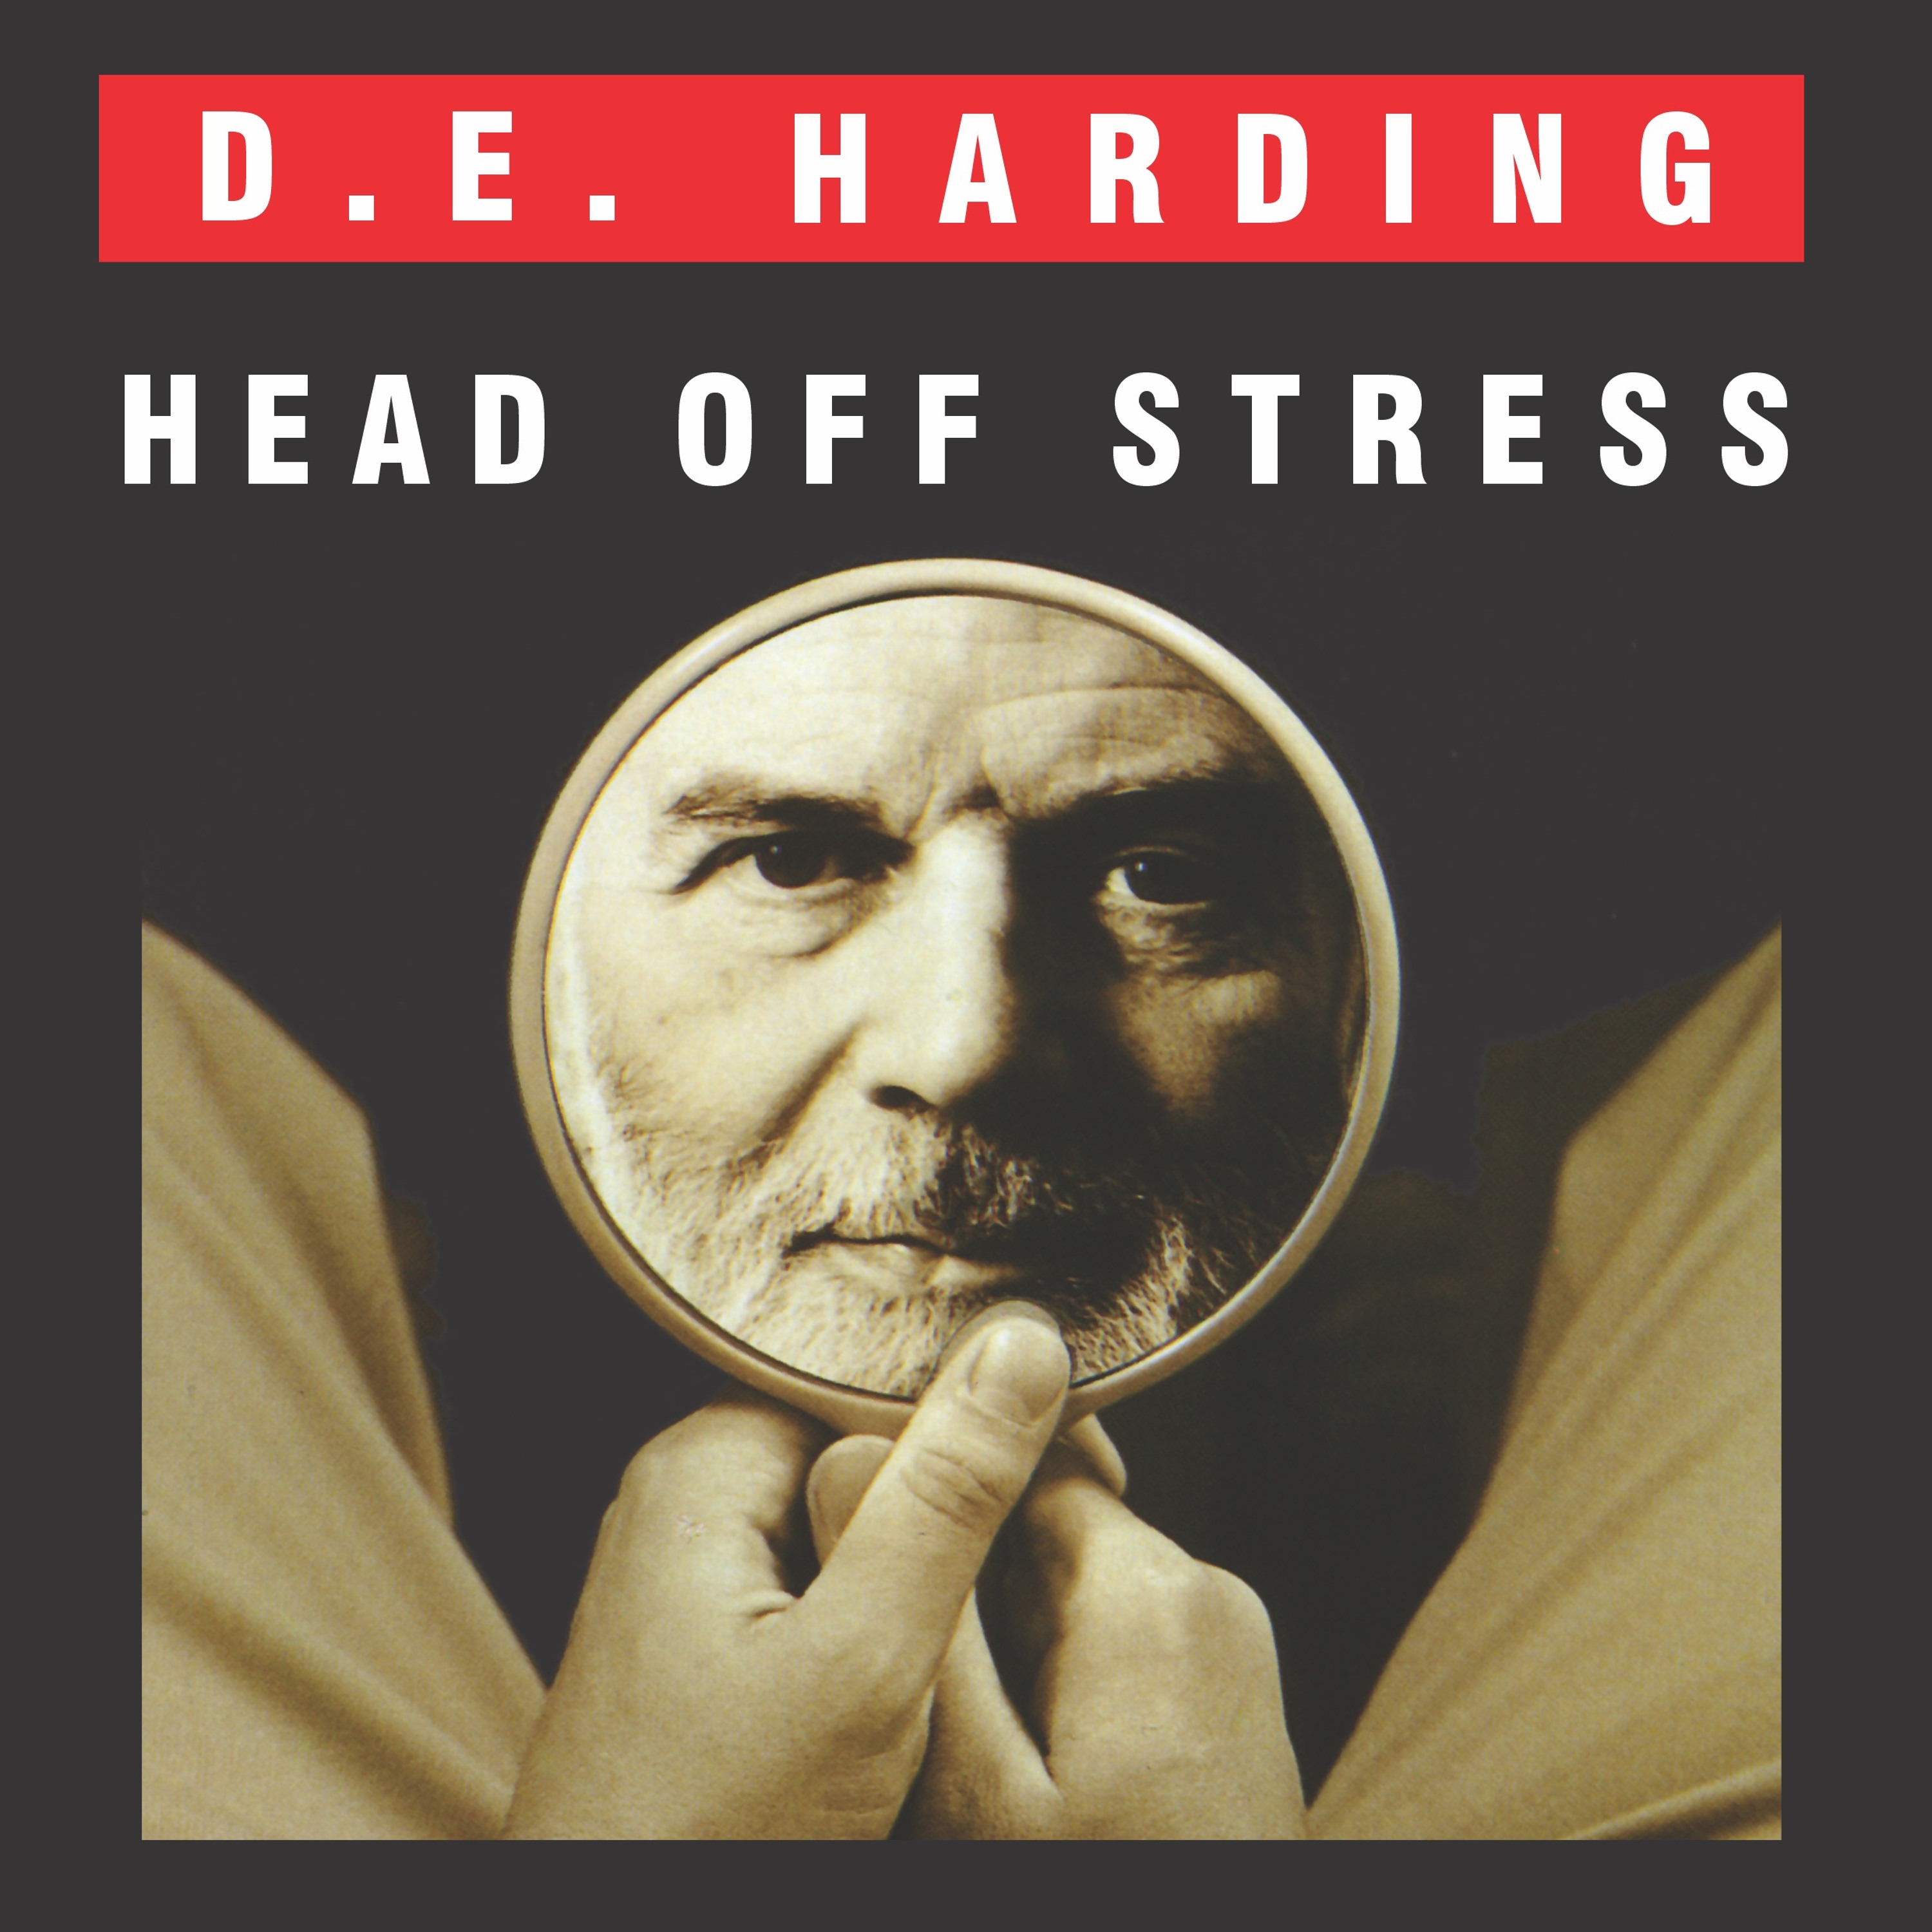 Head Off Stress sample from audiobook